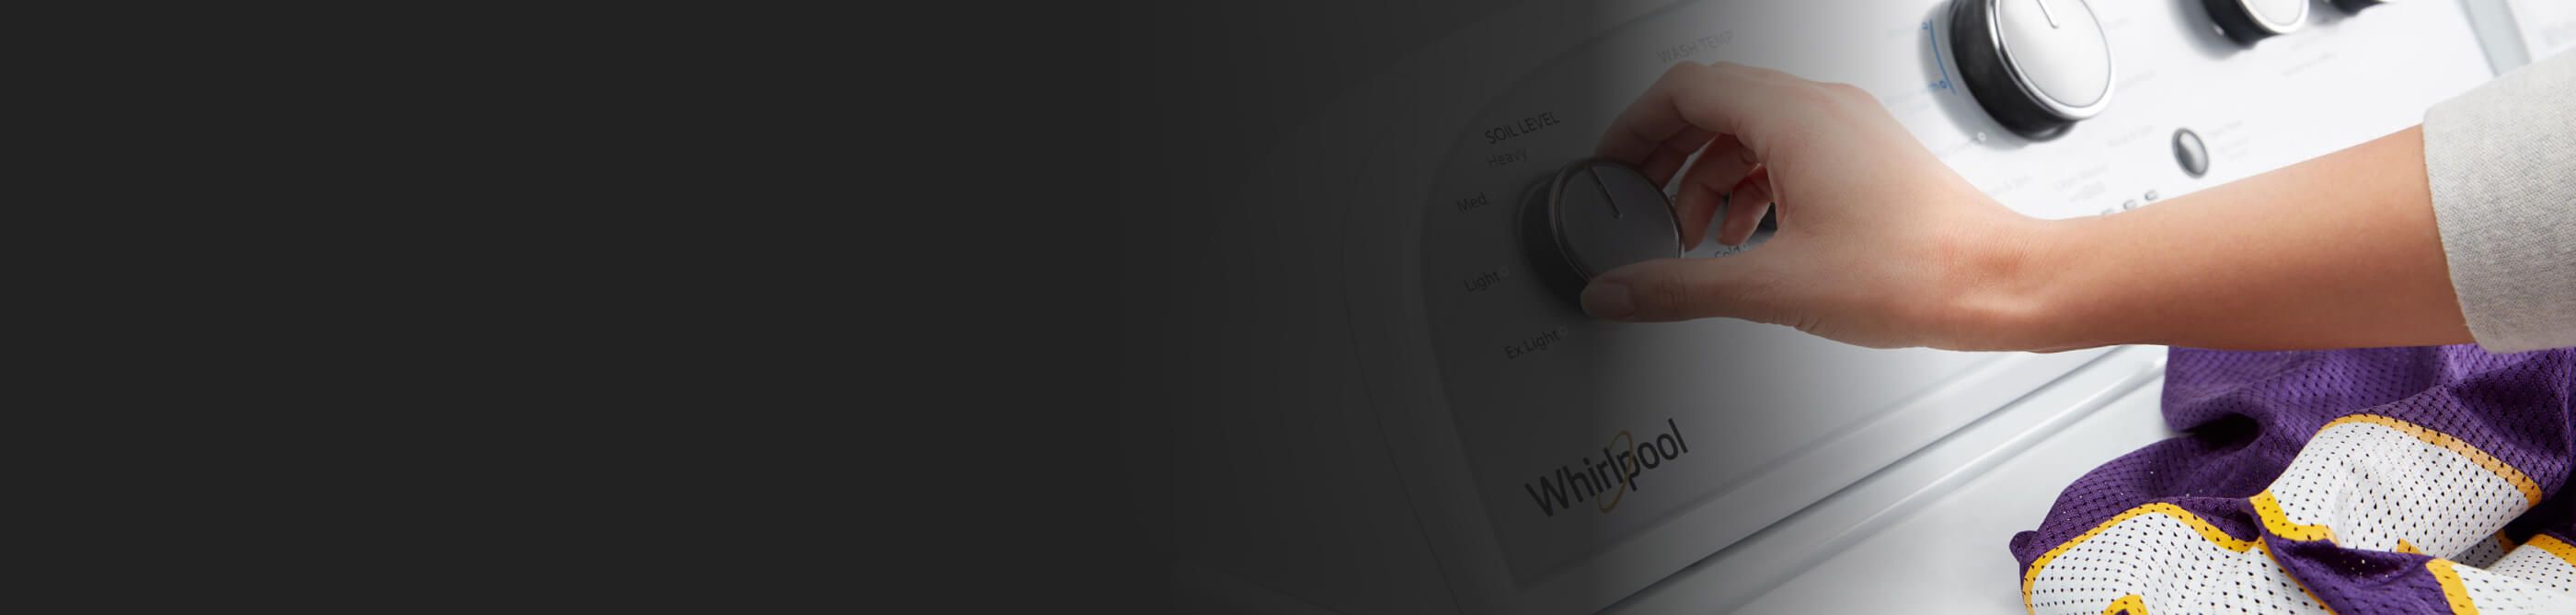 A person adjusting Whirlpool washer’s settings